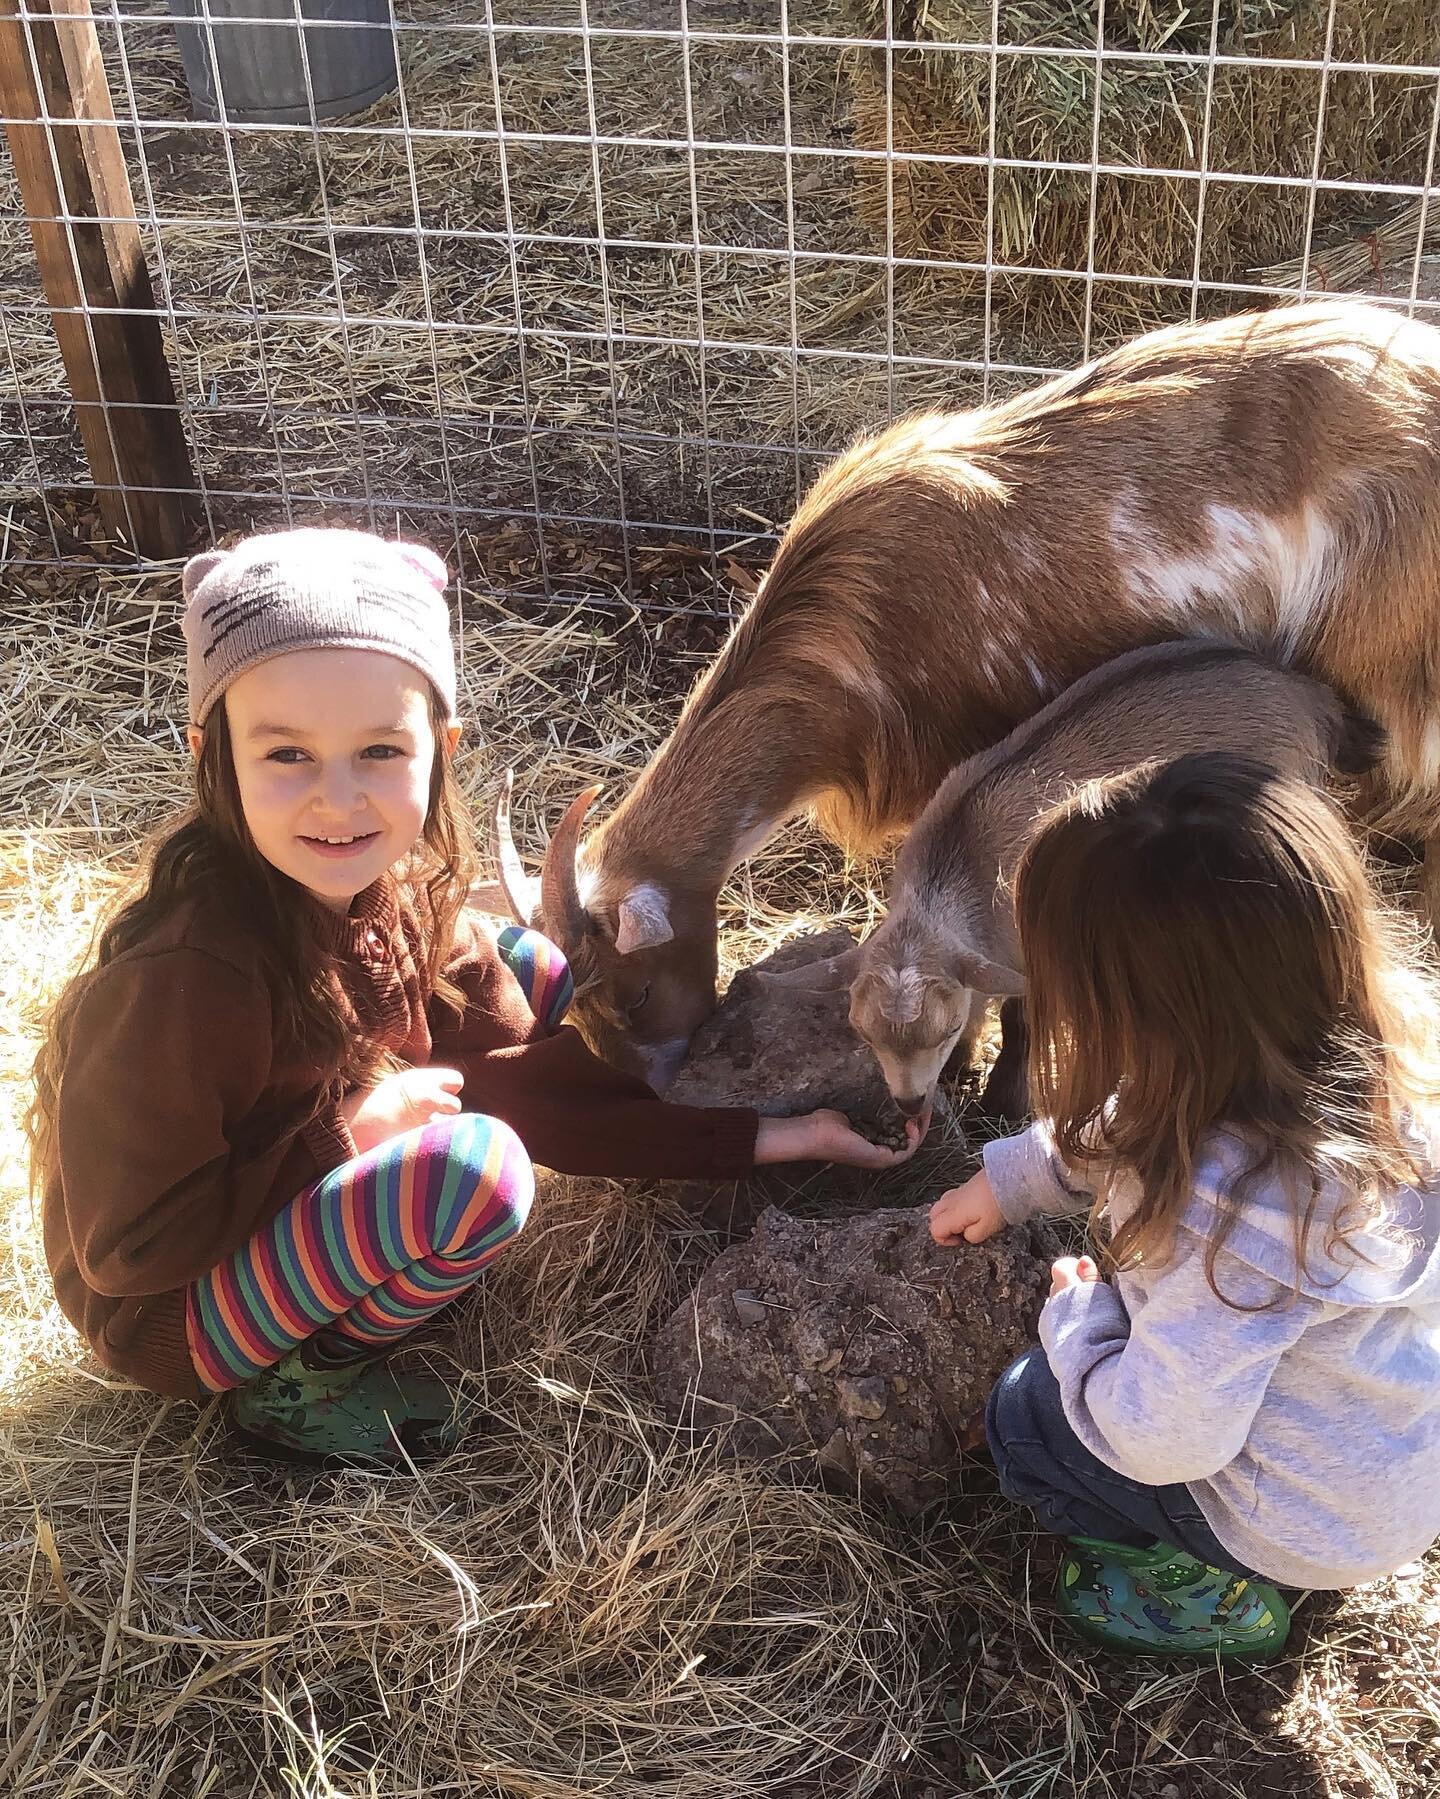 So happy to have these sweet goats on our little homestead. We are building relationships, learning responsibility, and becoming self sufficient.  #atxhomestead #oneacrehomestead #homesteadkids